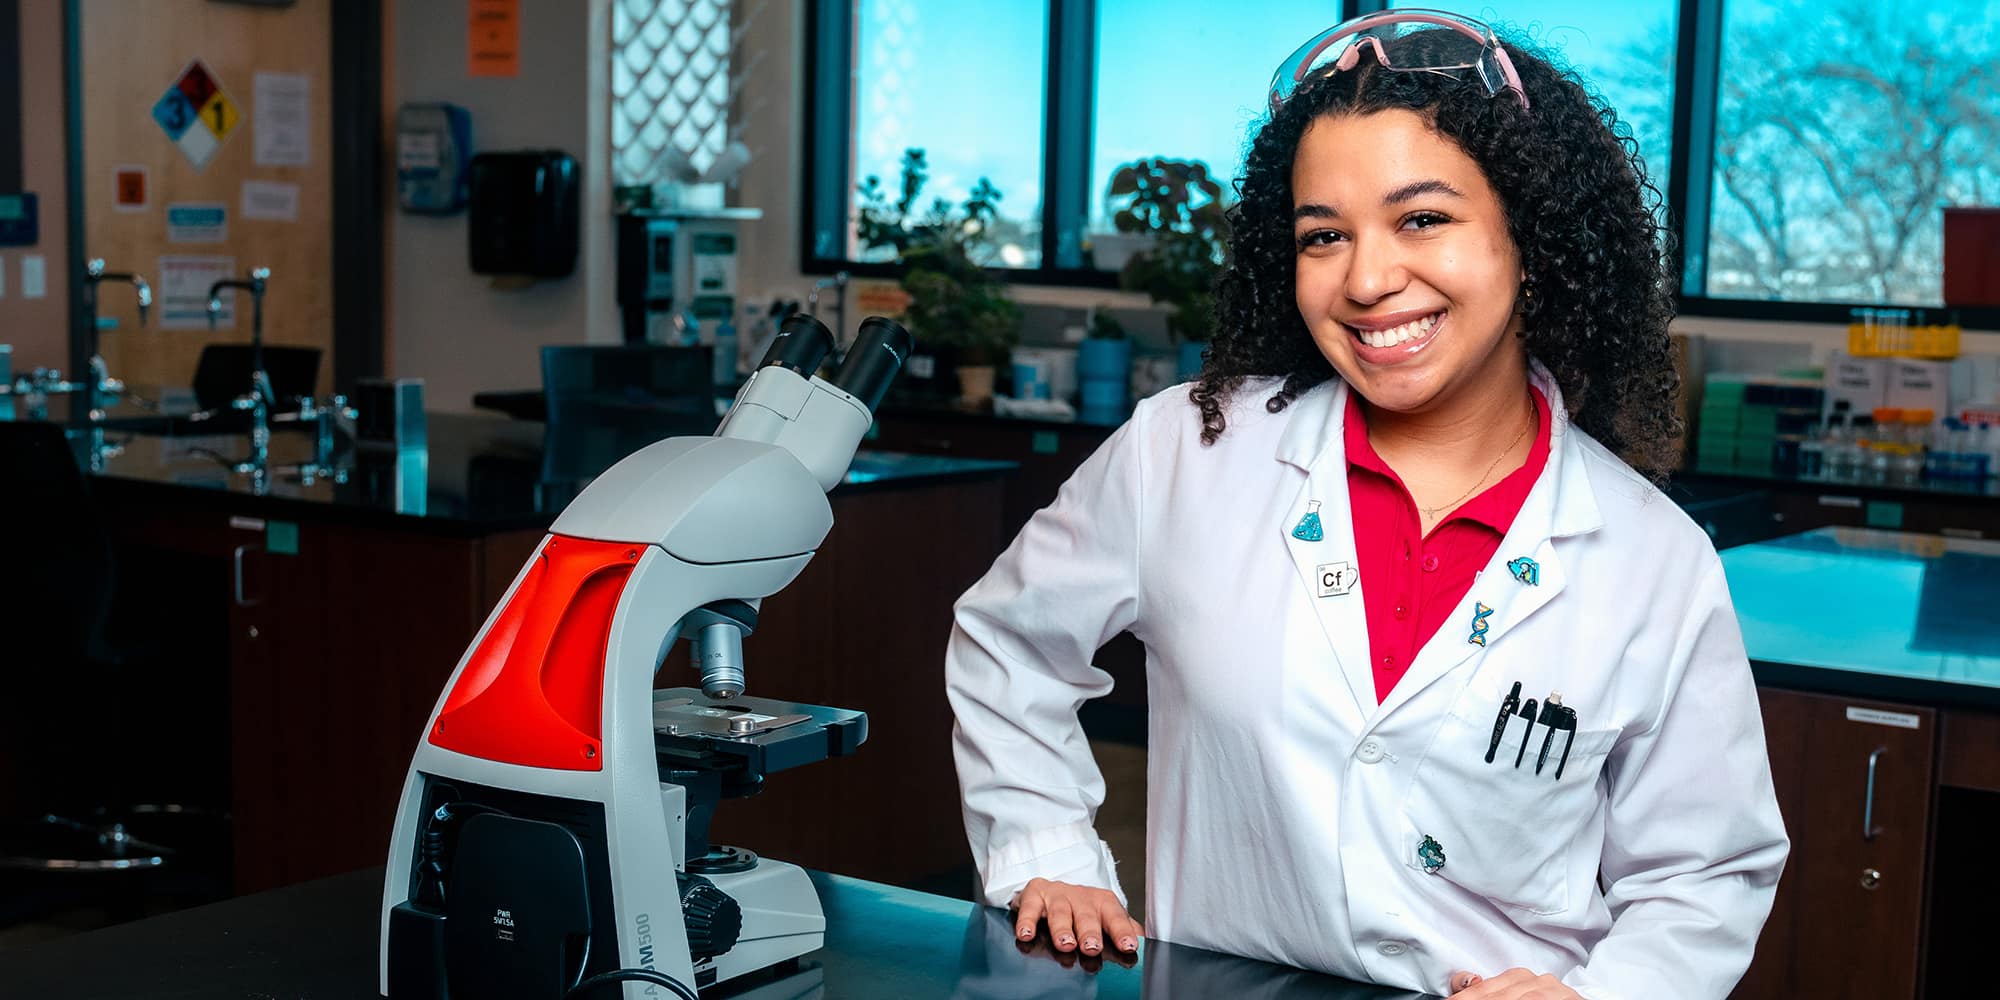 Makenzi, a woman with medium skin tone and curly hair, smiles in a white lab coat next to a microscope.